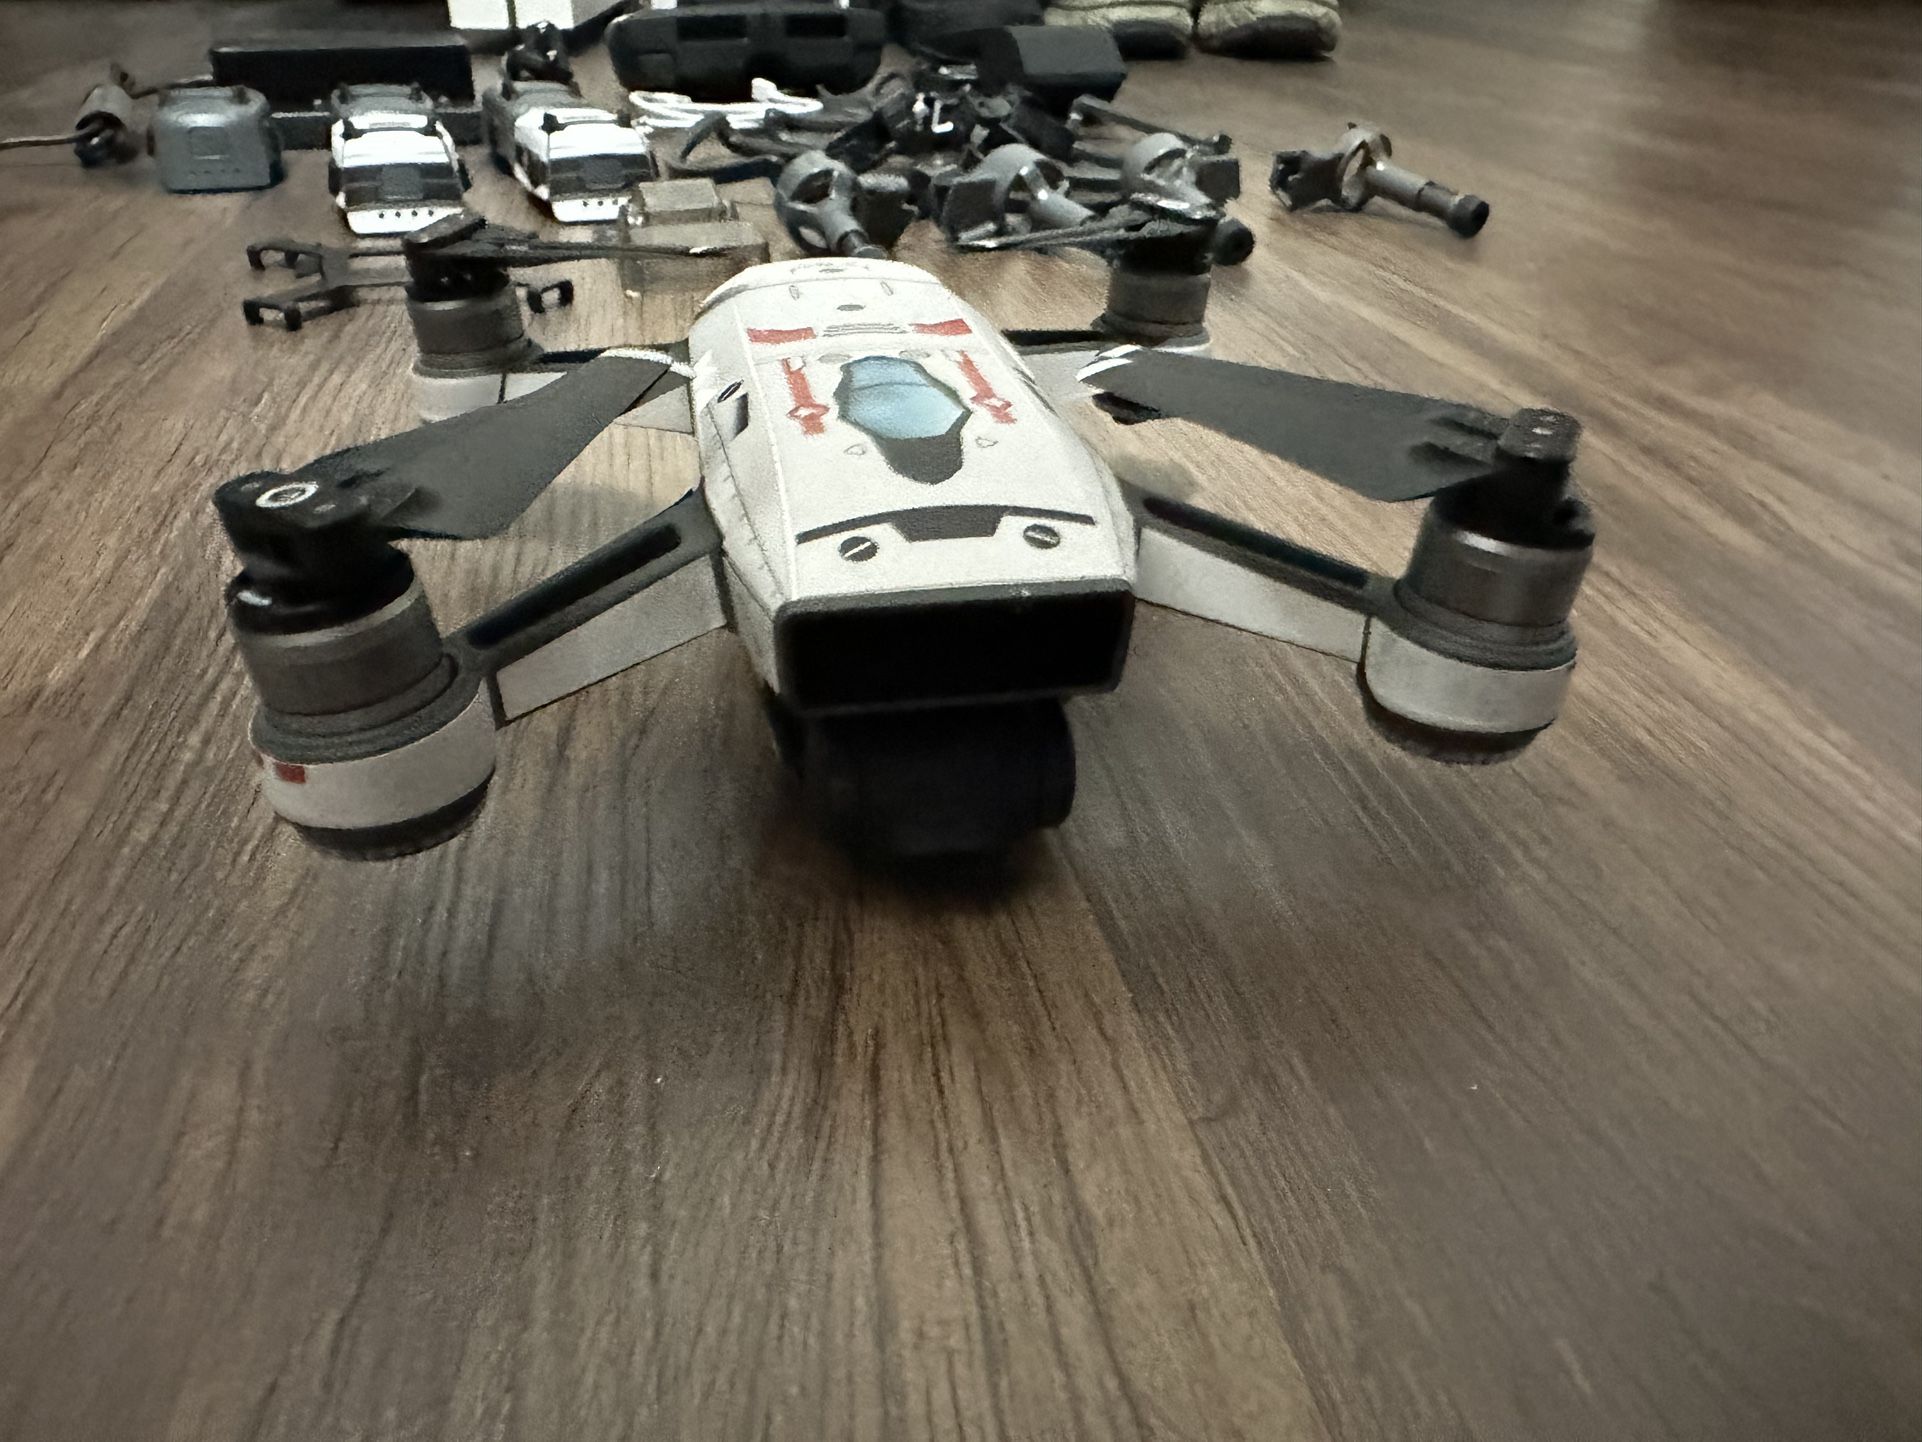 DJI Spark Drone With accessories 